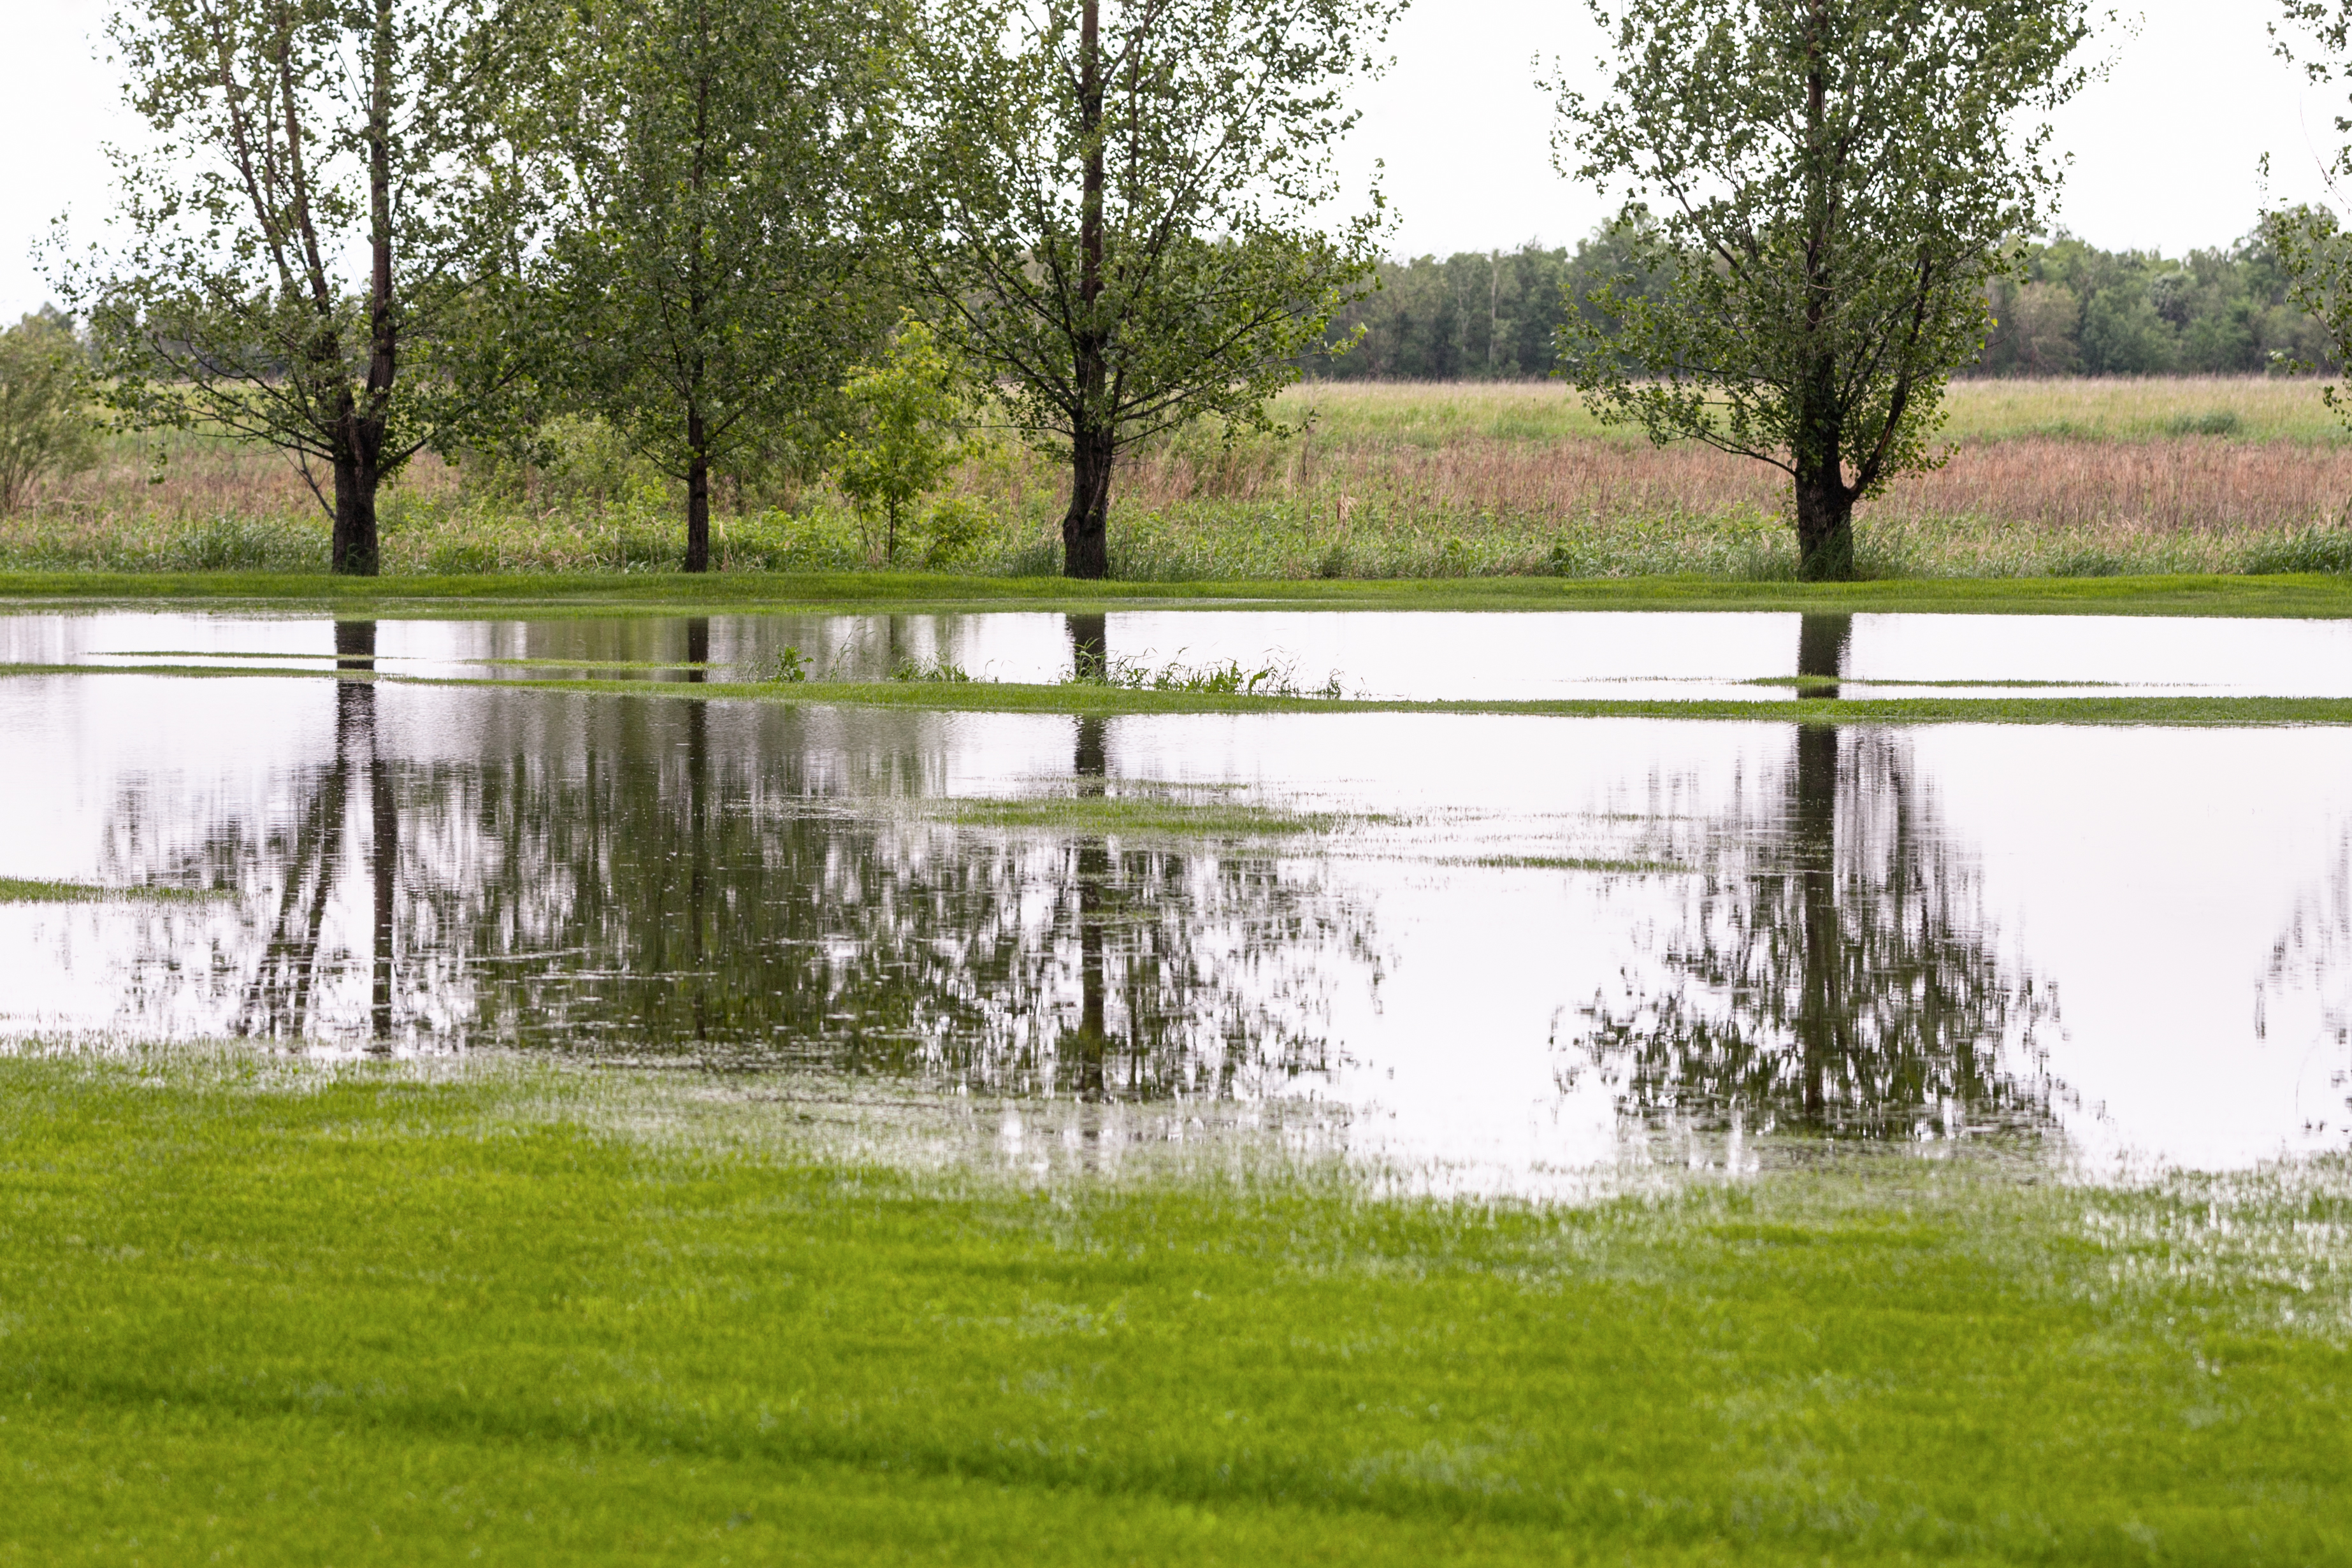 How to Deal With Drainage IssuesA Cautionary Tale